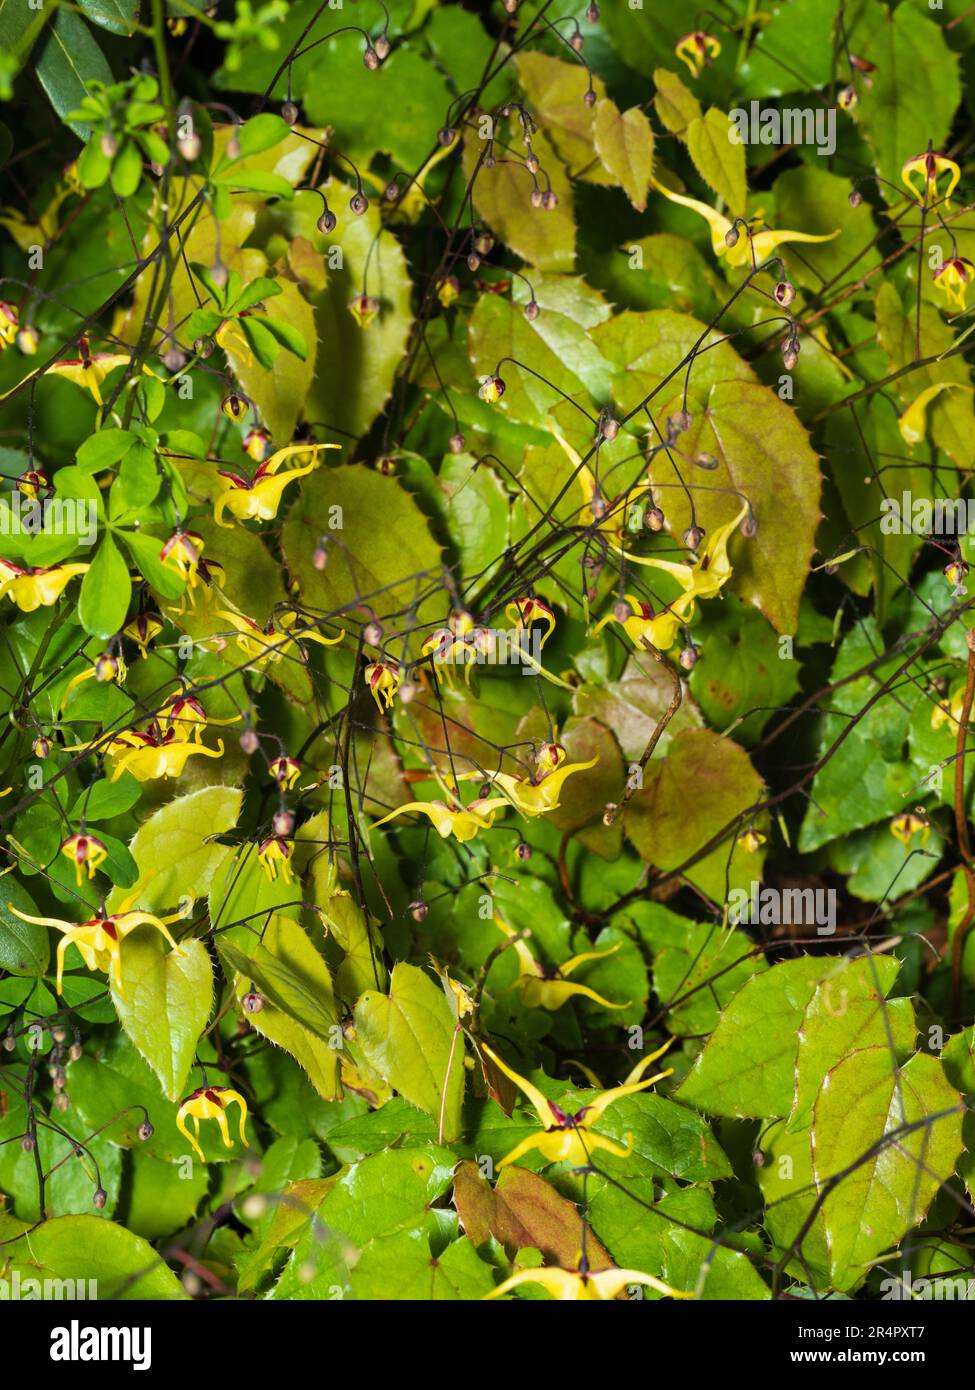 Small, spurred yellow flowers of the hardy perennial barrenwort, Epimedium 'Windfire' hover above the leathery foliage Stock Photo